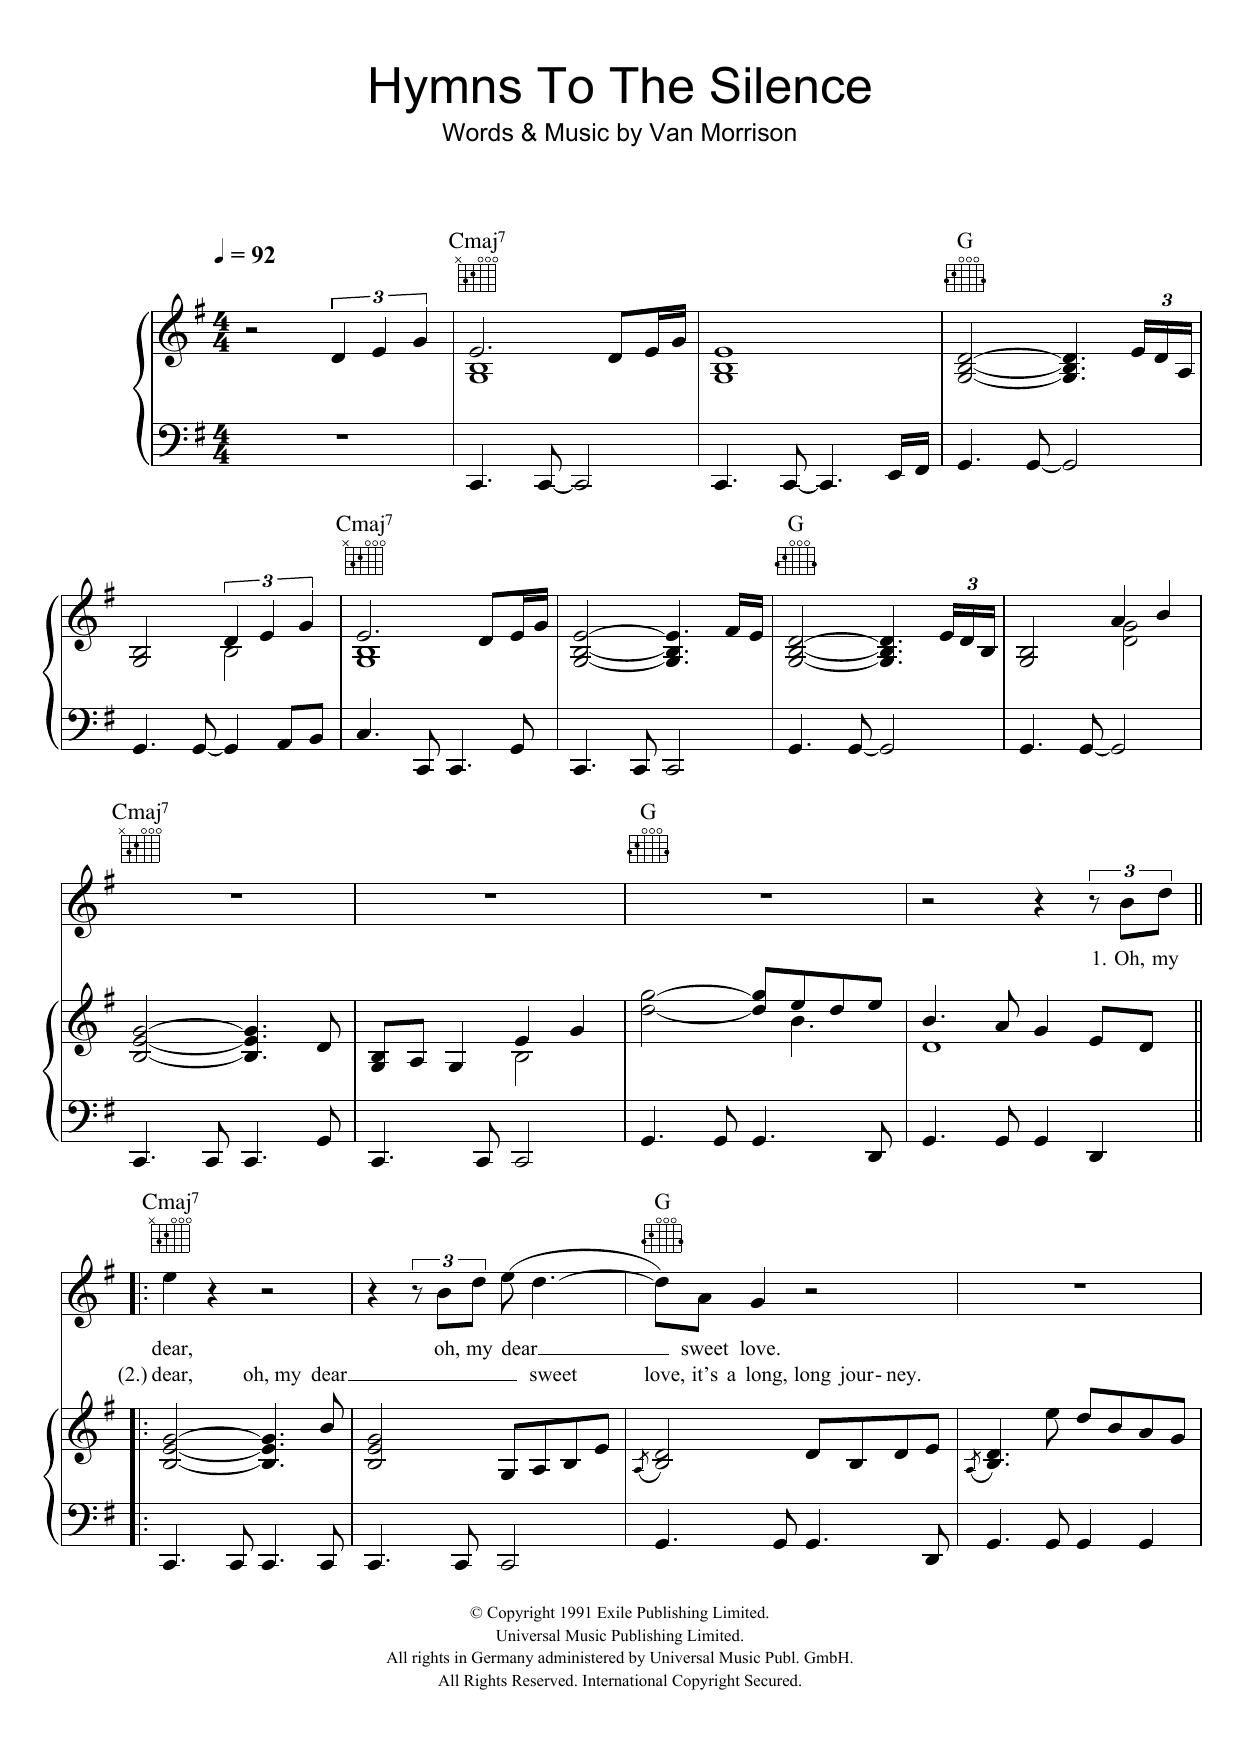 Download Van Morrison Hymns To The Silence Sheet Music